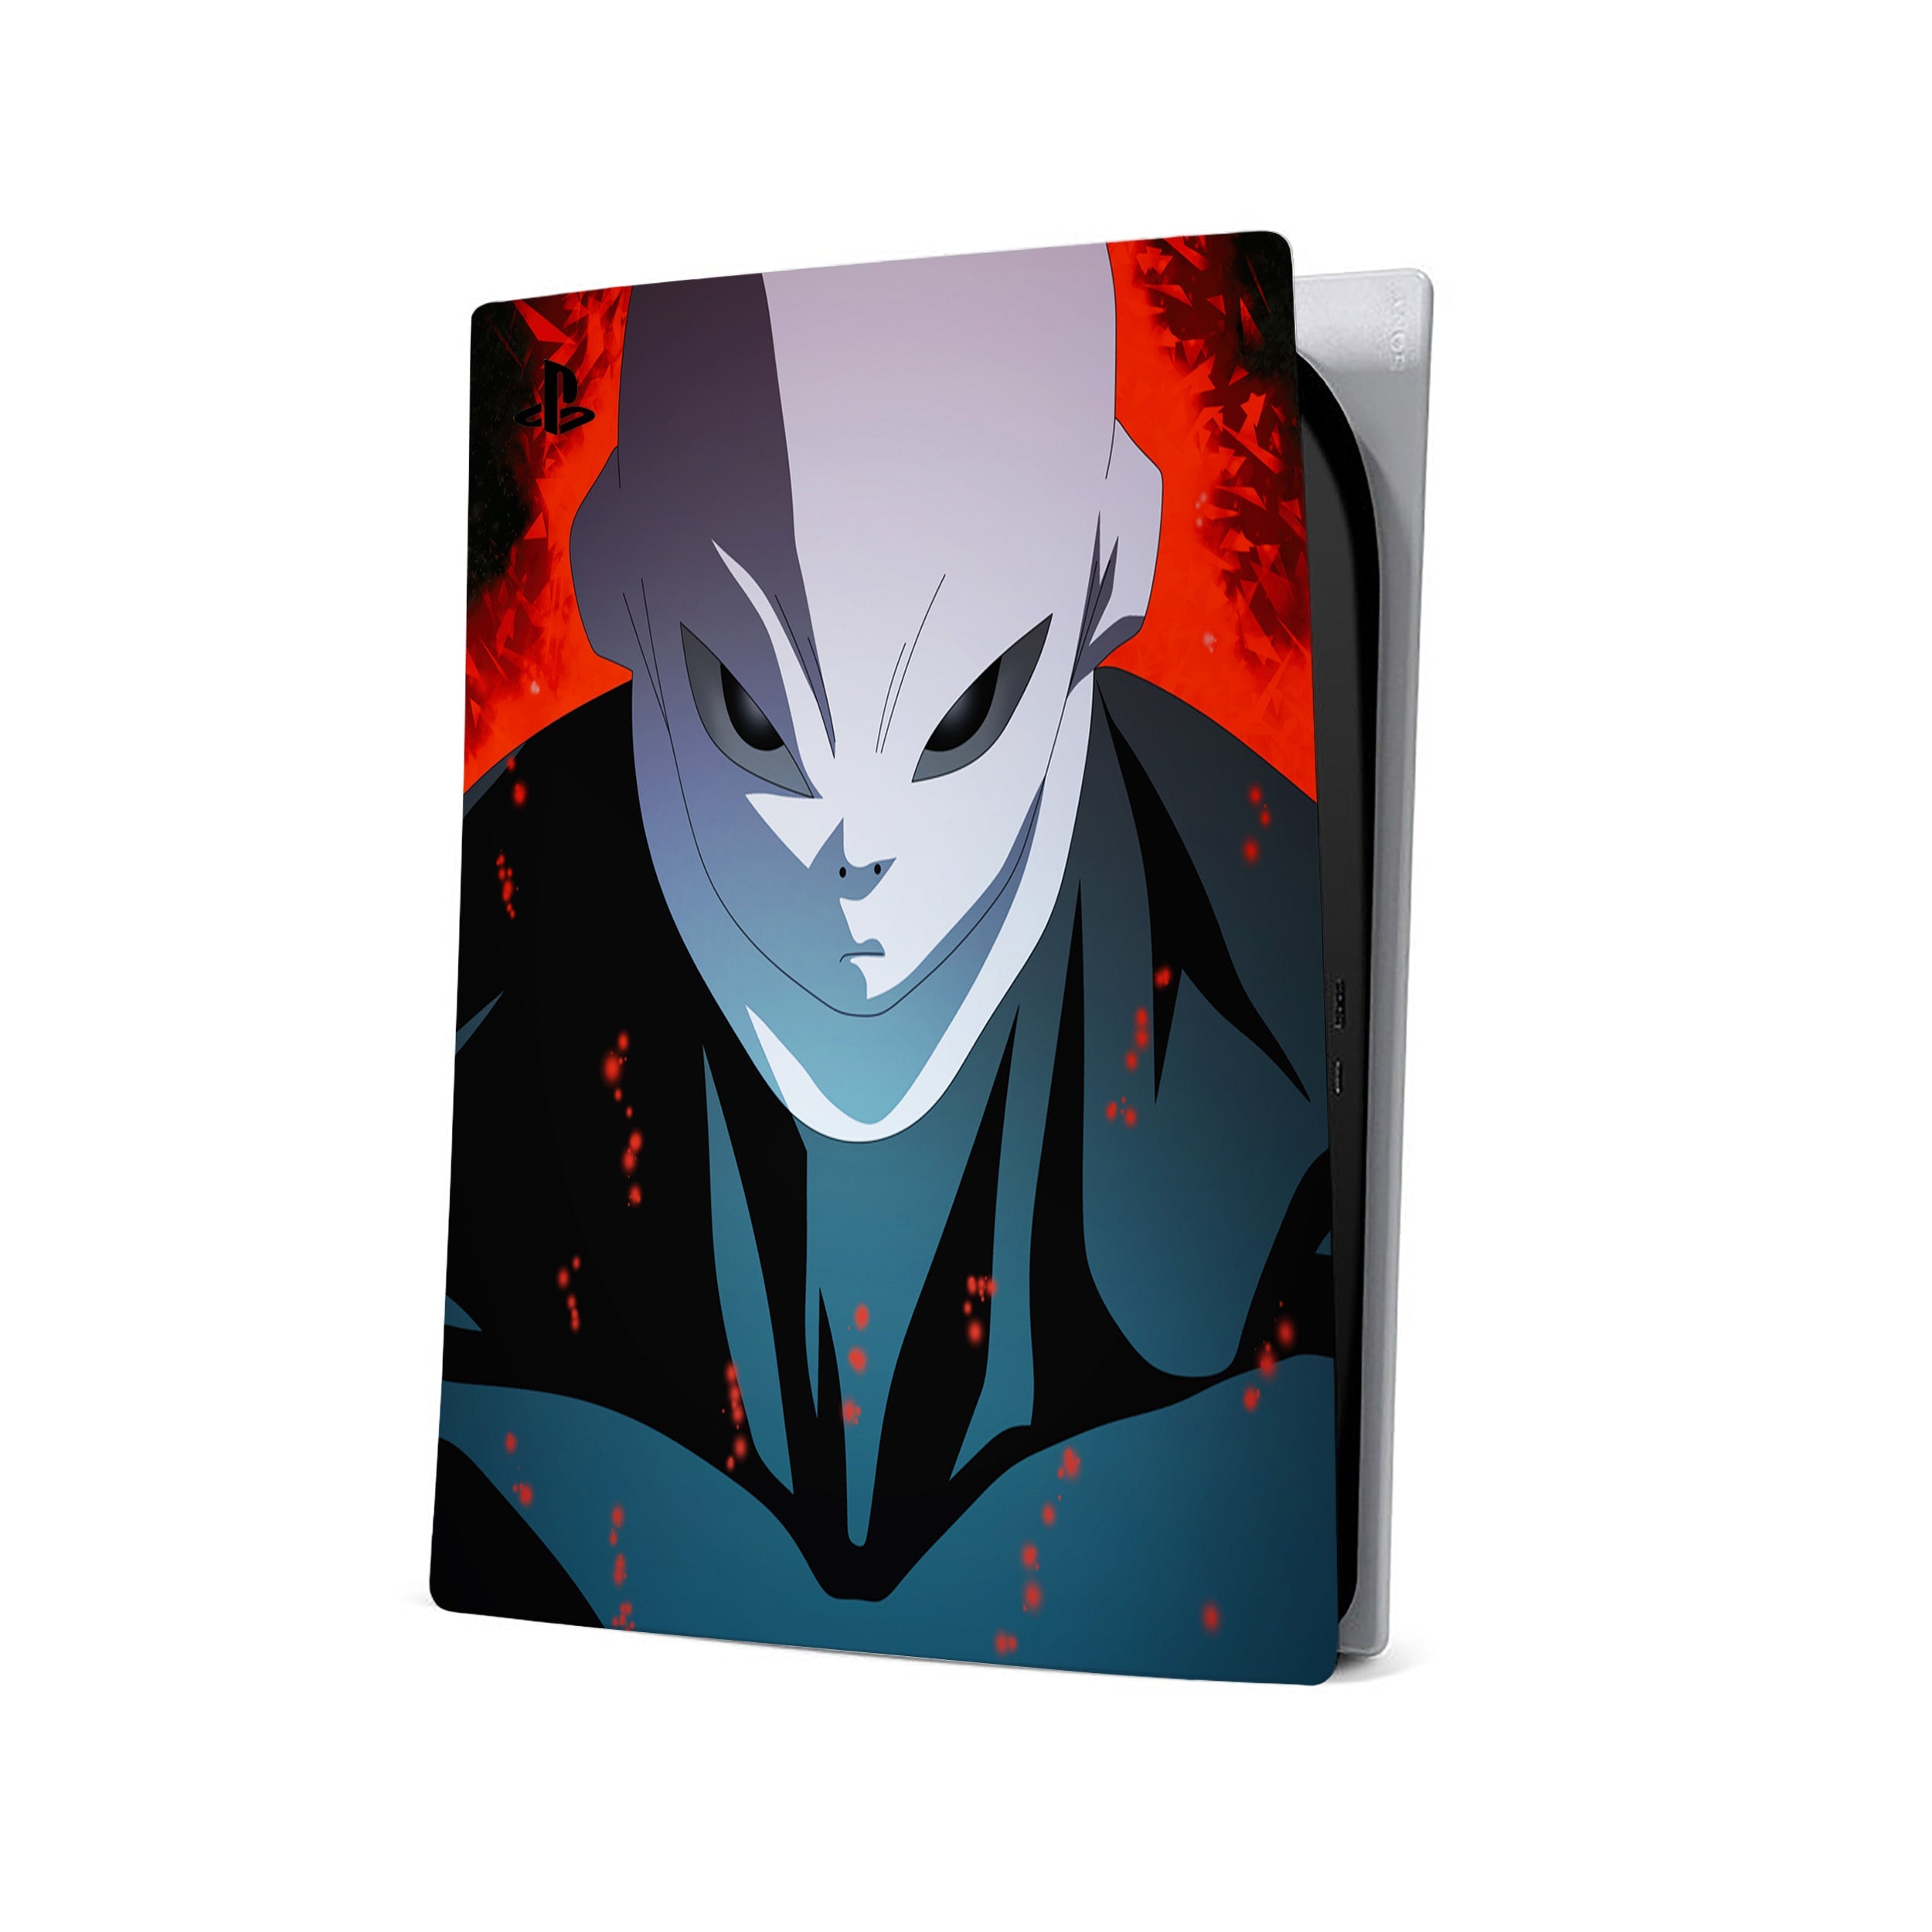 A video game skin featuring a Dragon Ball Super Jiren design for the PS5.